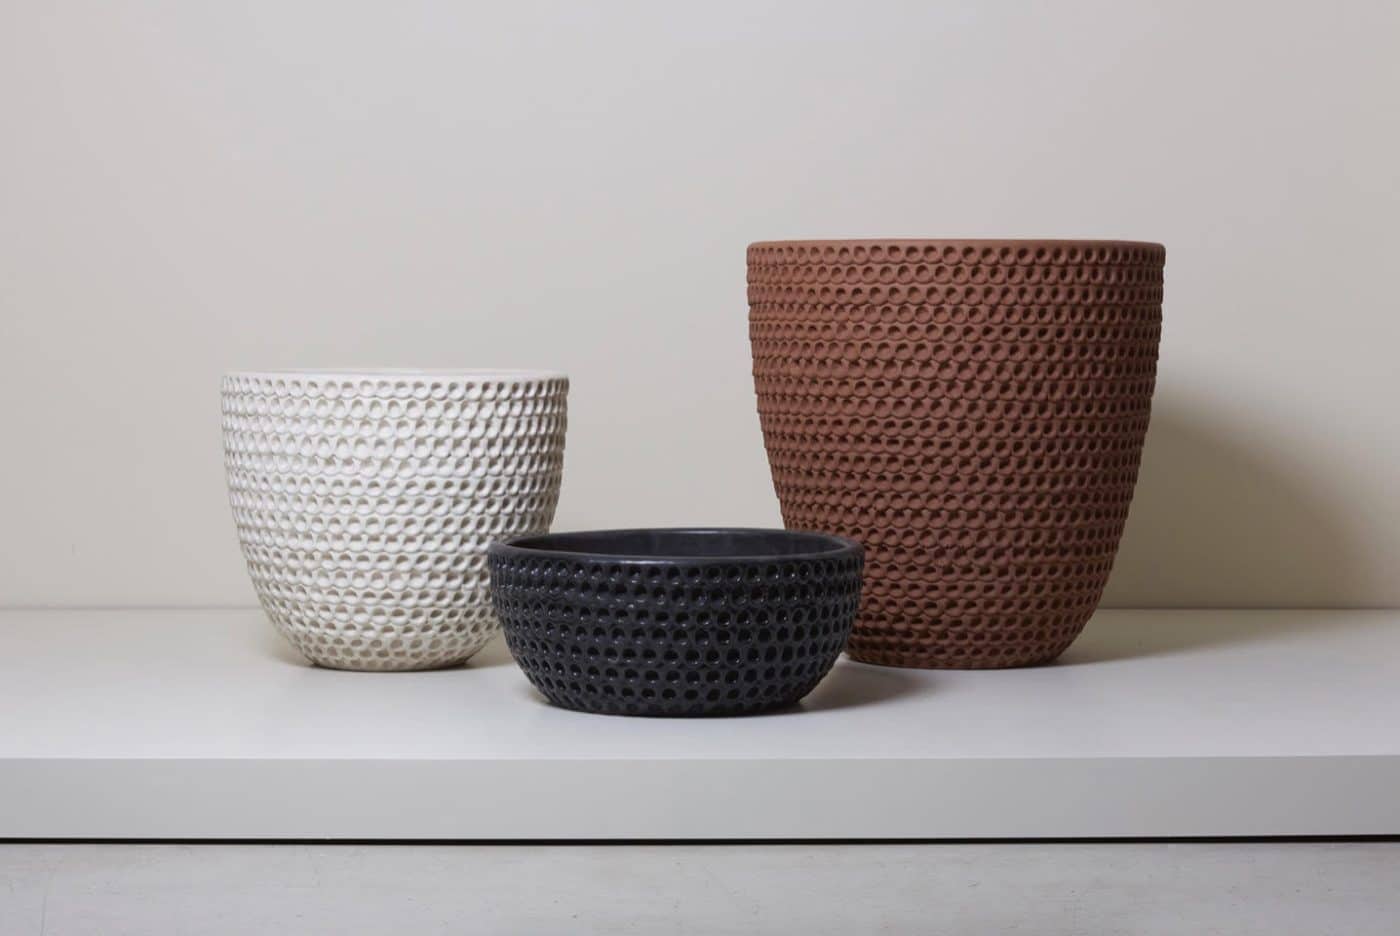 A trio of planters by Stan Bitters — one white, one black and one terra-cotta — textured with rows of circular imprints